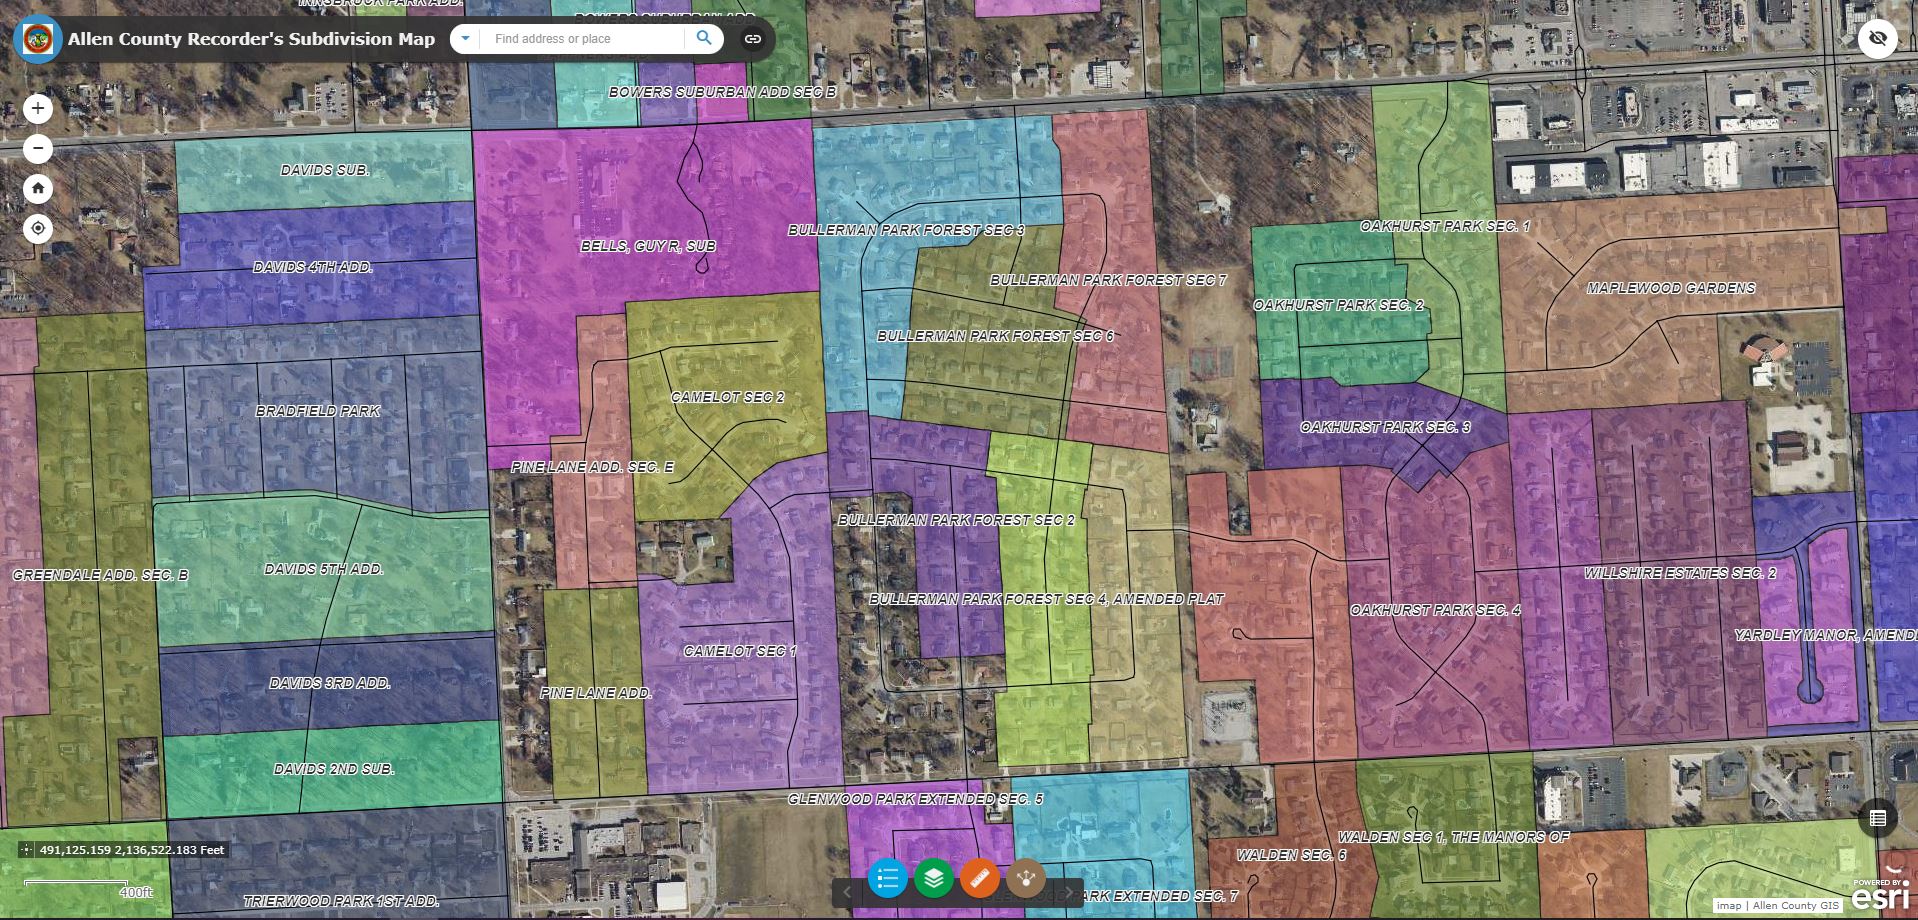 Screenshot from the Interactive subdivision locator map